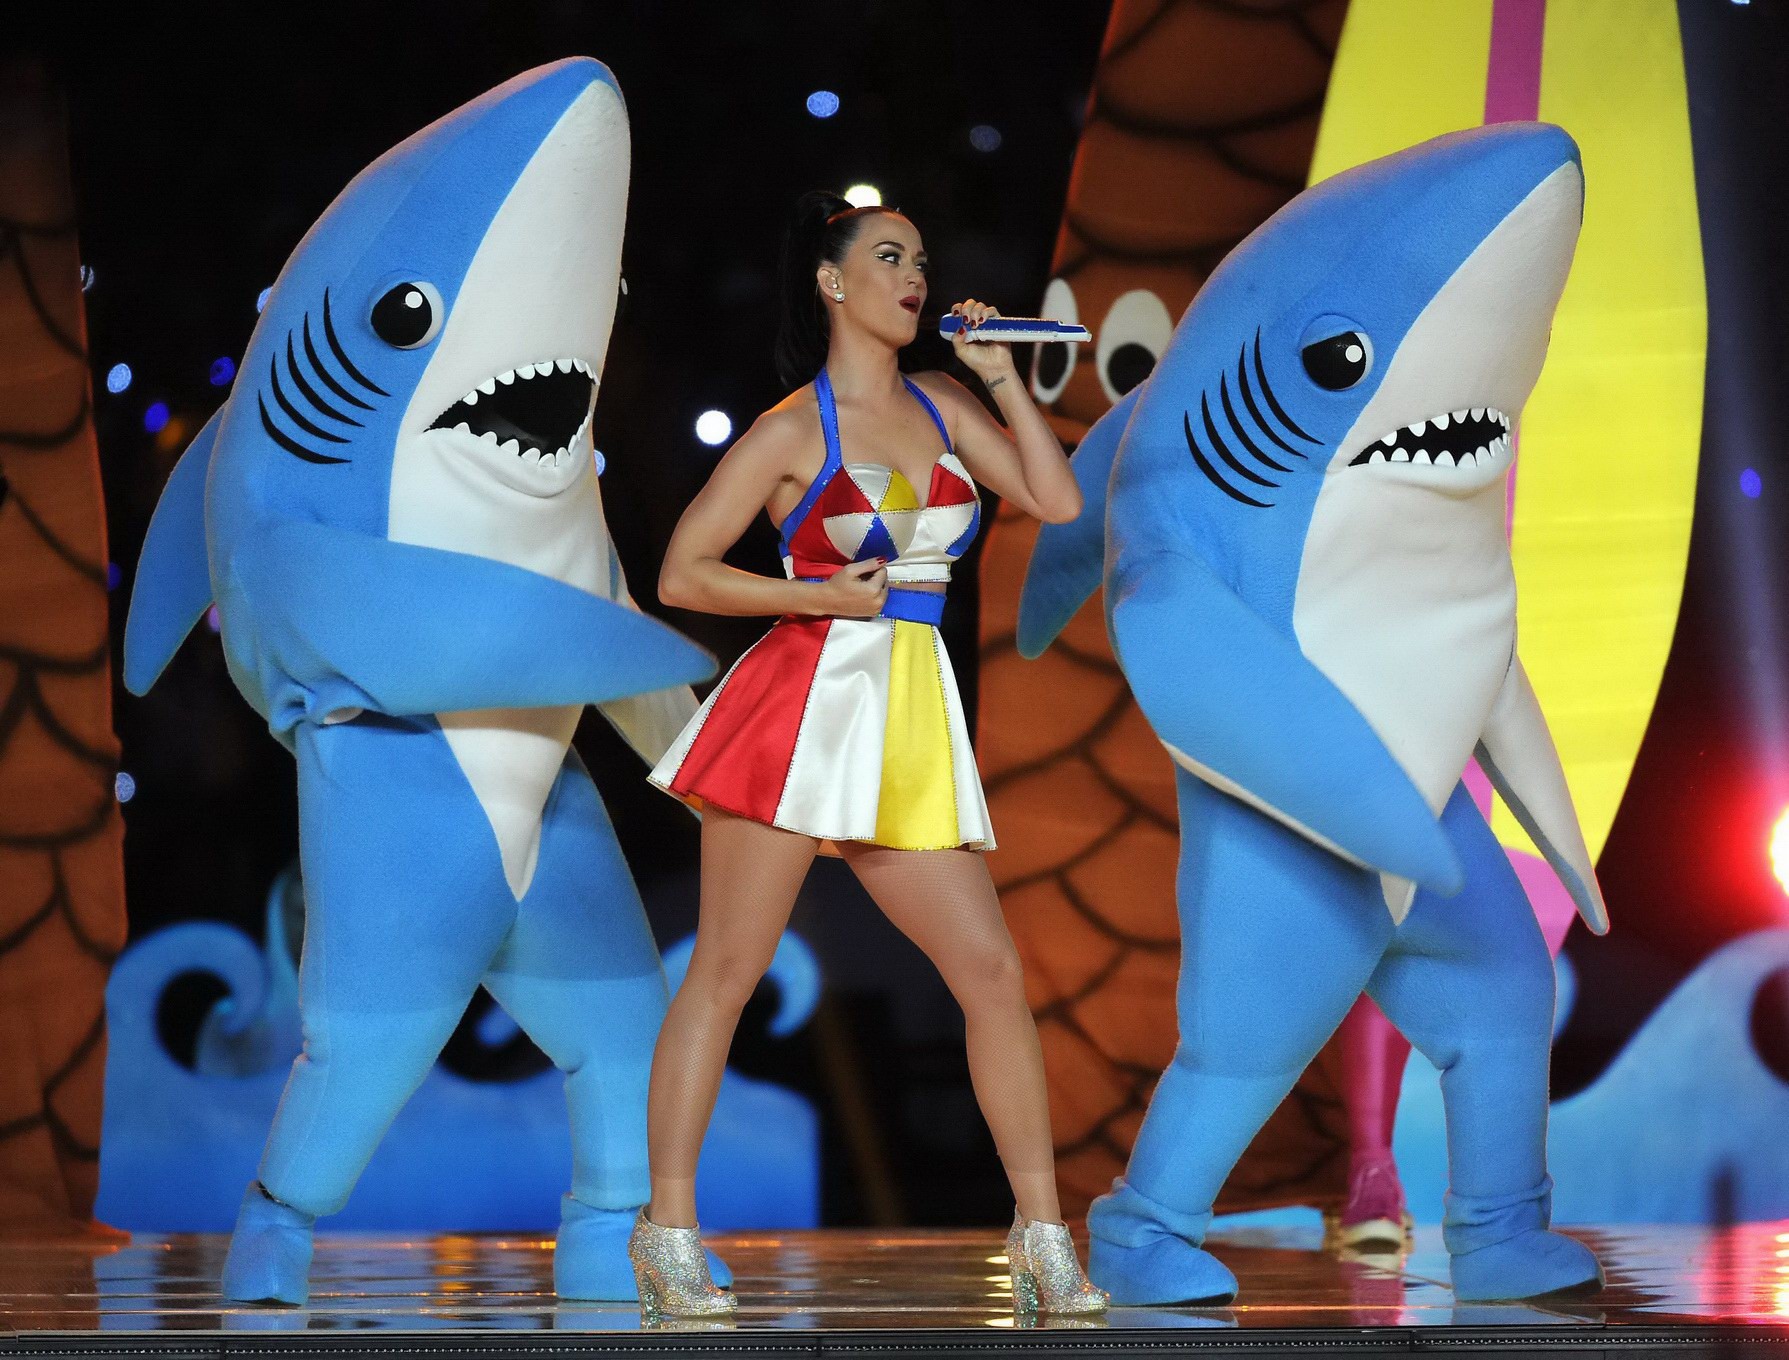 Katy Perry busty and leggy in tiny colorful mini dress performing on Super Bowl  #75174188